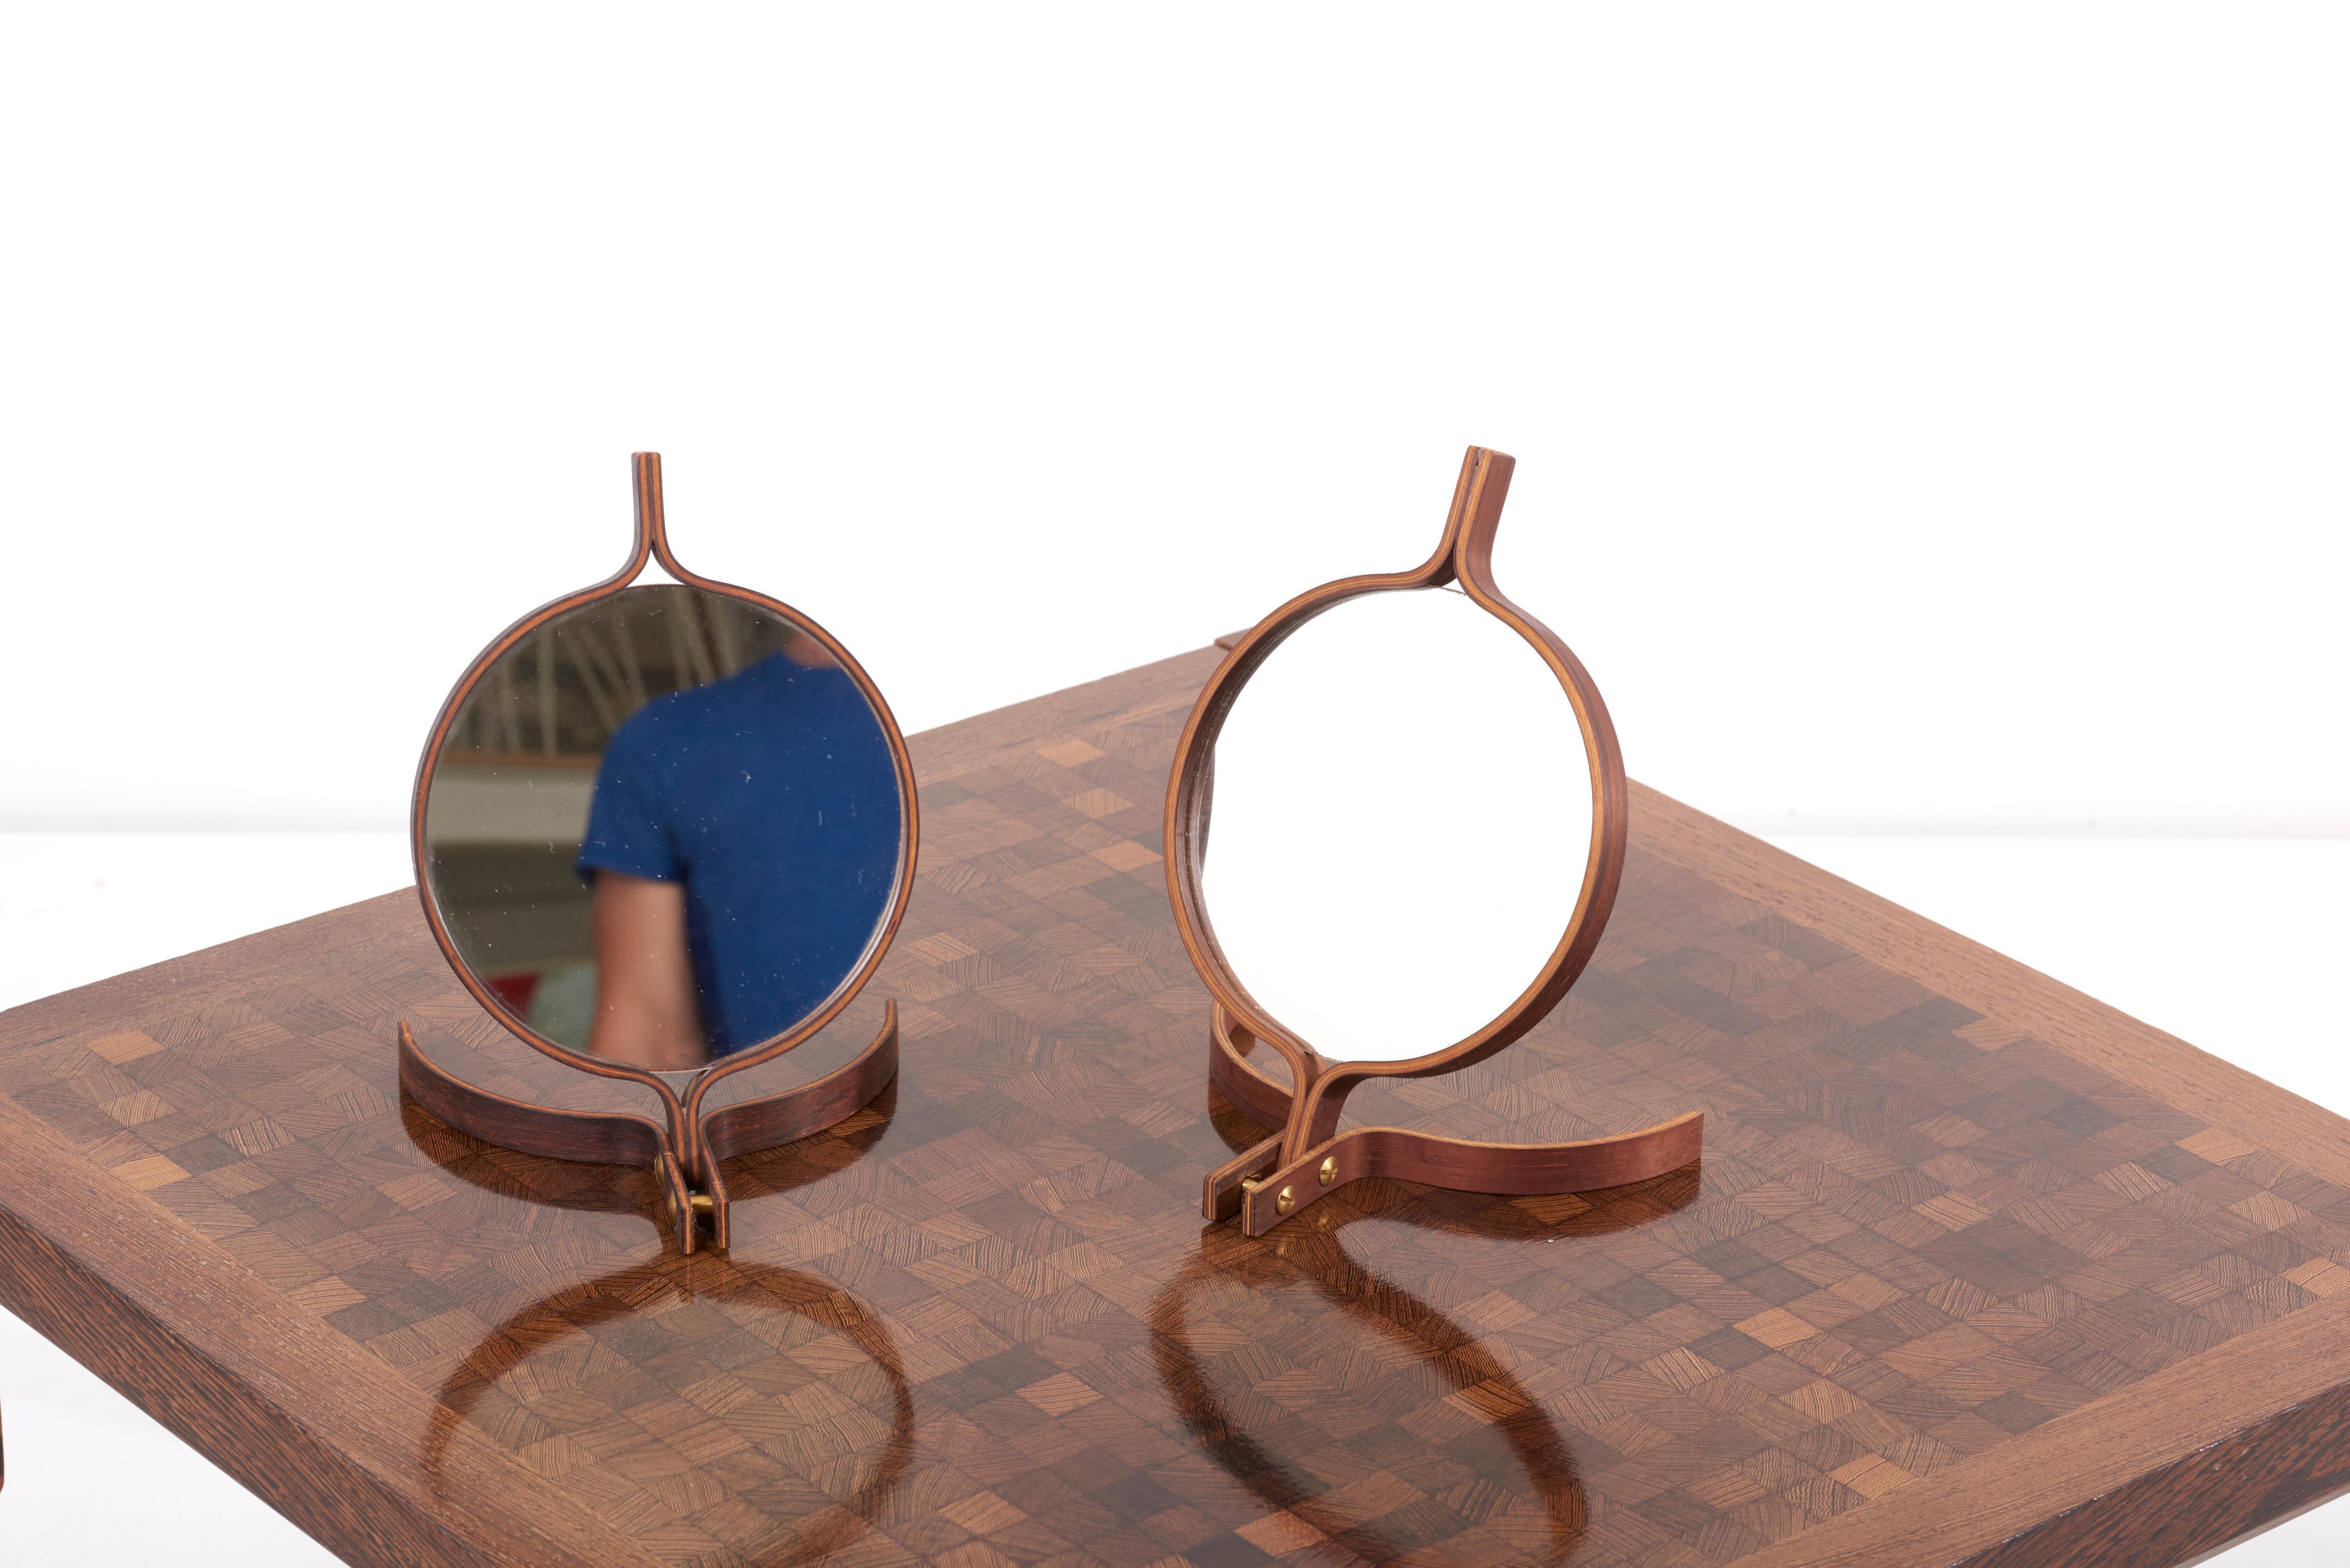 A mirror in ebonized wood and brass by Bech & Starup for Den Permanente, Copenhagen in 1960s.
It can be used both as a mirror to hand or as a make up table mirror.
4 pieces available.